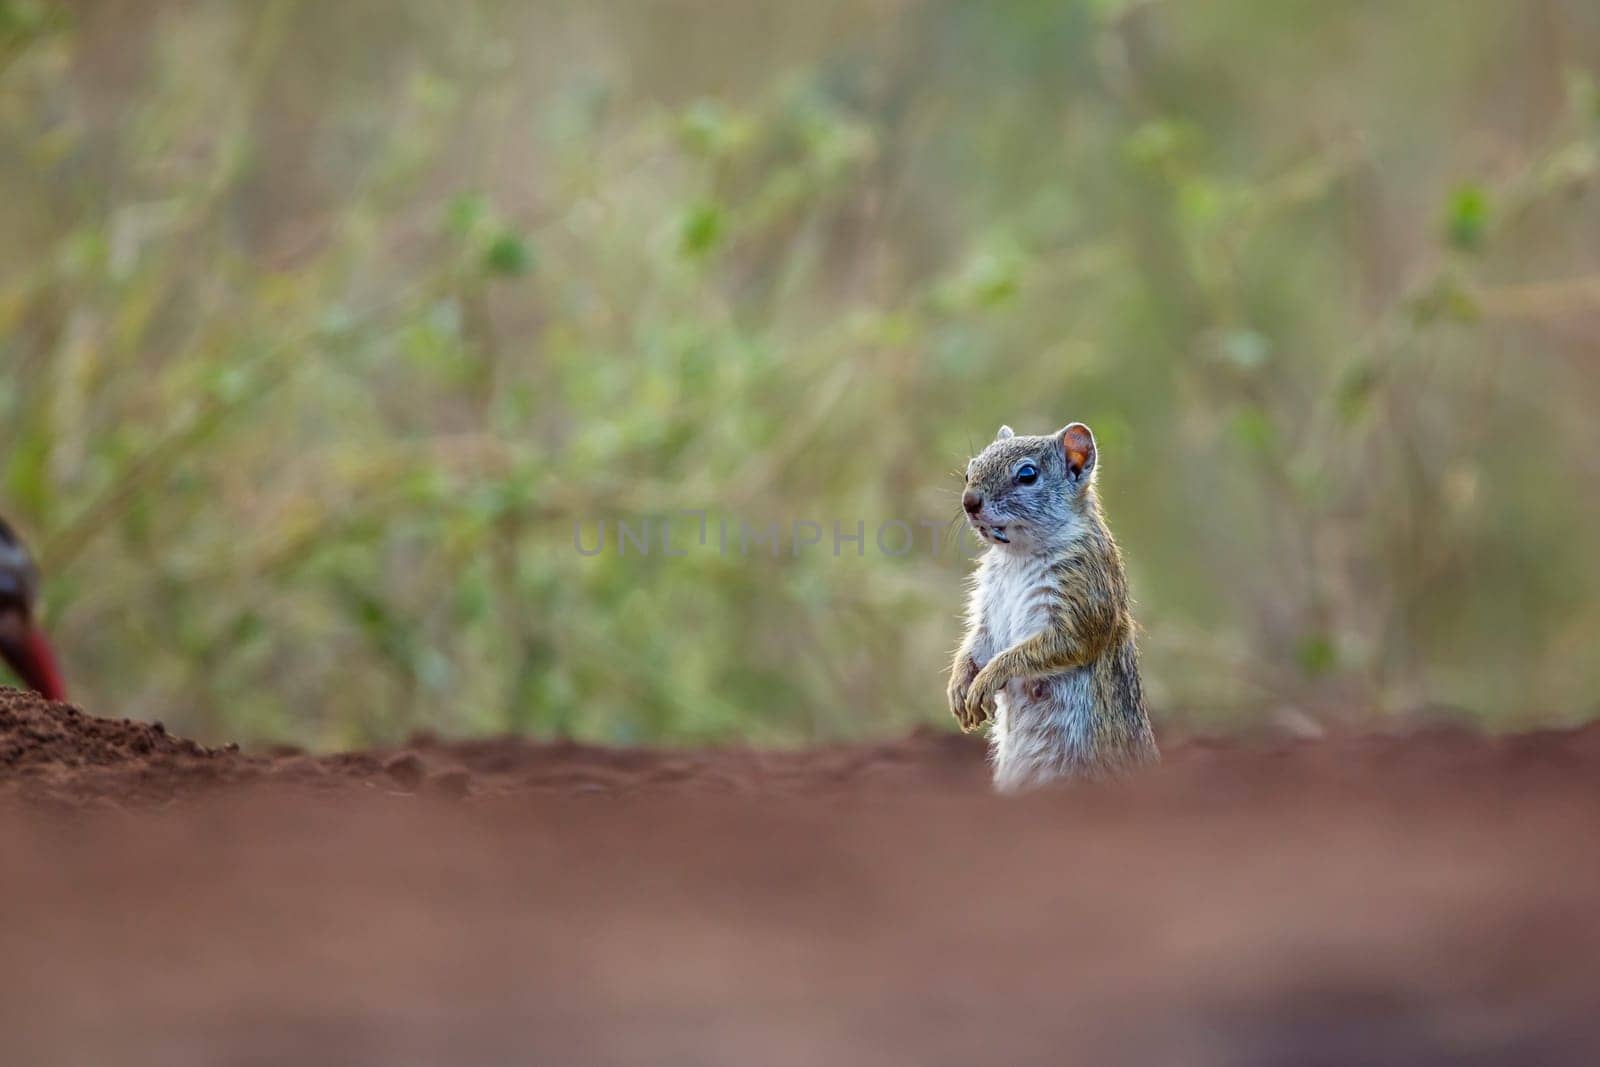 Smith bush squirrel standing up with blur foreground in Kruger National park, South Africa ; Specie Paraxerus cepapi family of Sciuridae